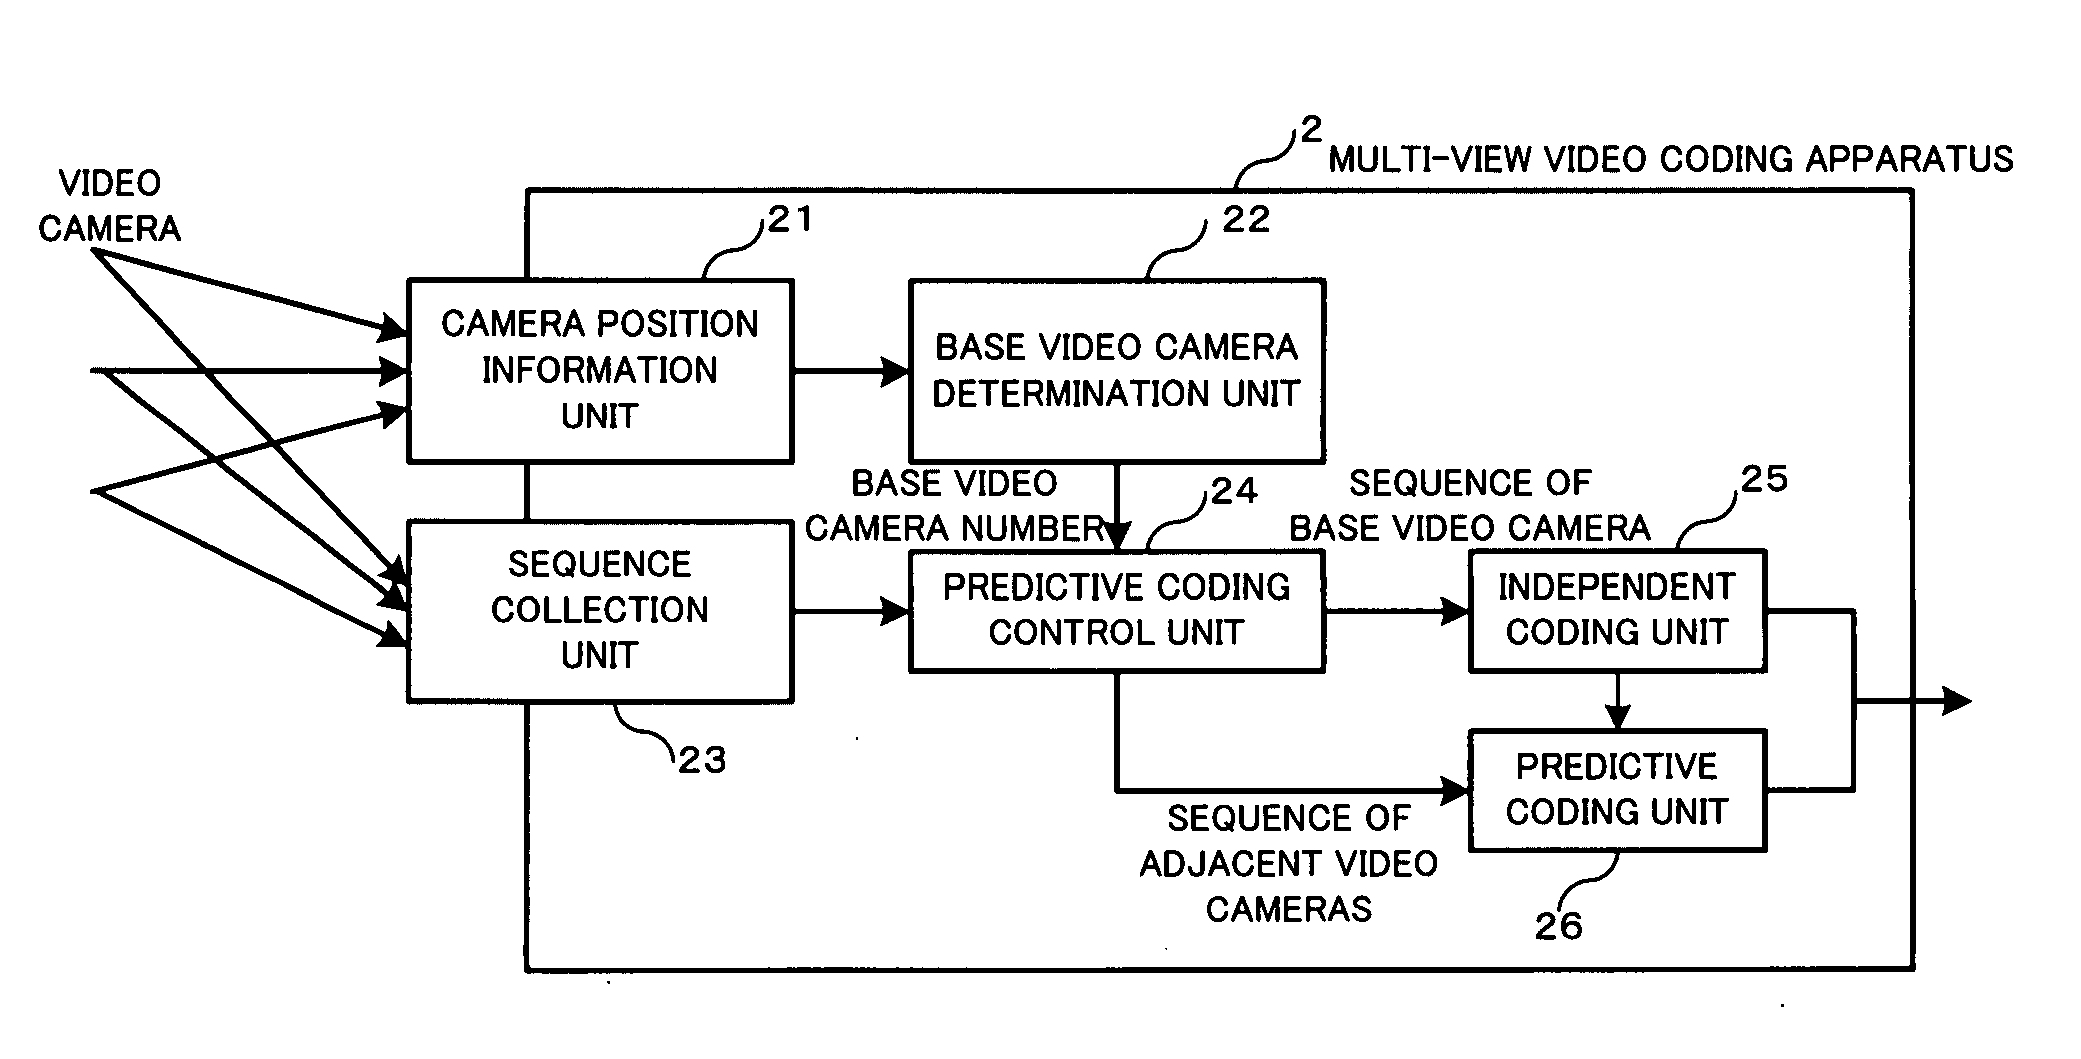 Multi-view video coding method and apparatus